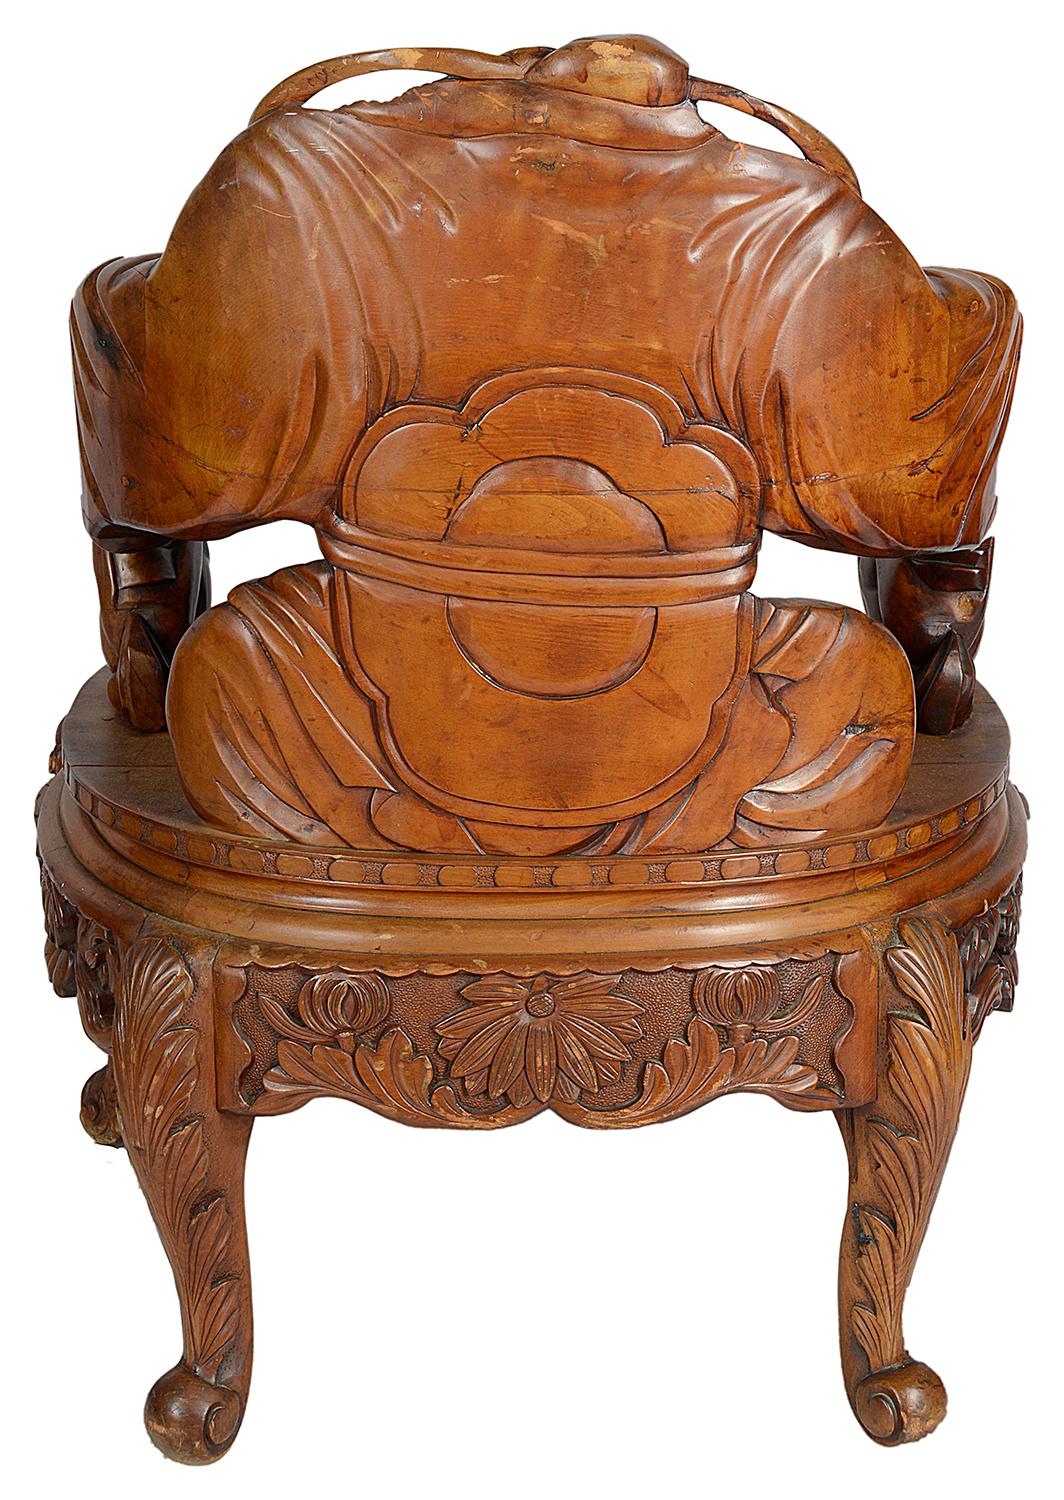 Meiji Period Century Japanese Carved Wood Armchairs, circa 1900 For Sale 2